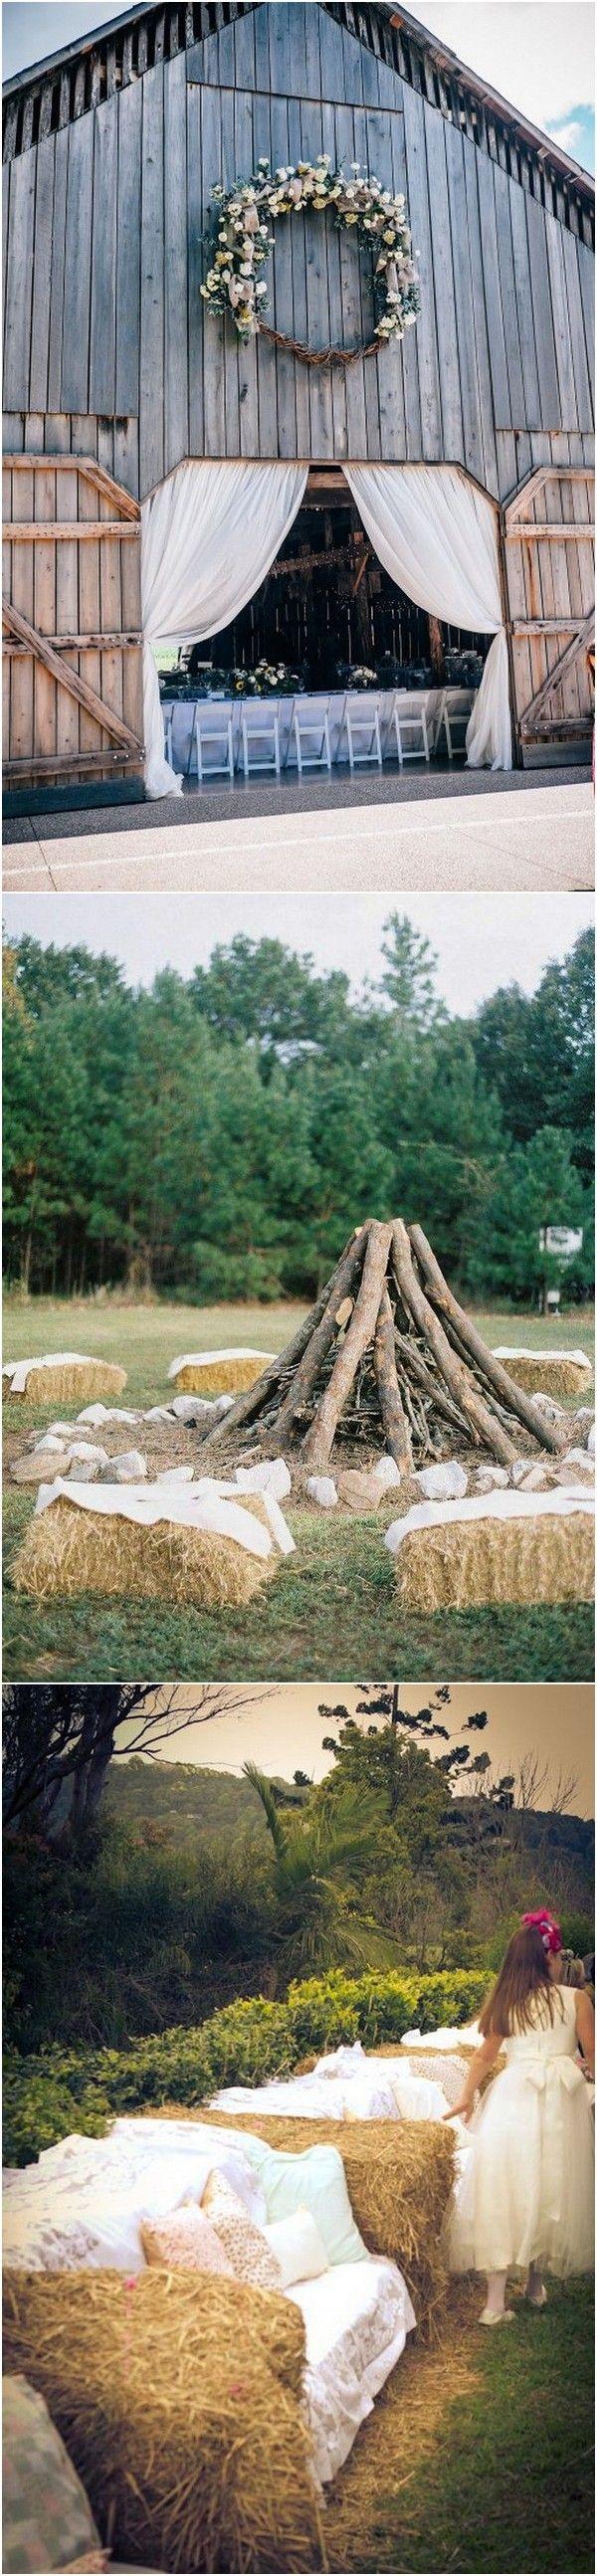 Wedding - Trending-26 Country Rustic Farm Wedding Ideas For 2018 - Page 3 Of 4